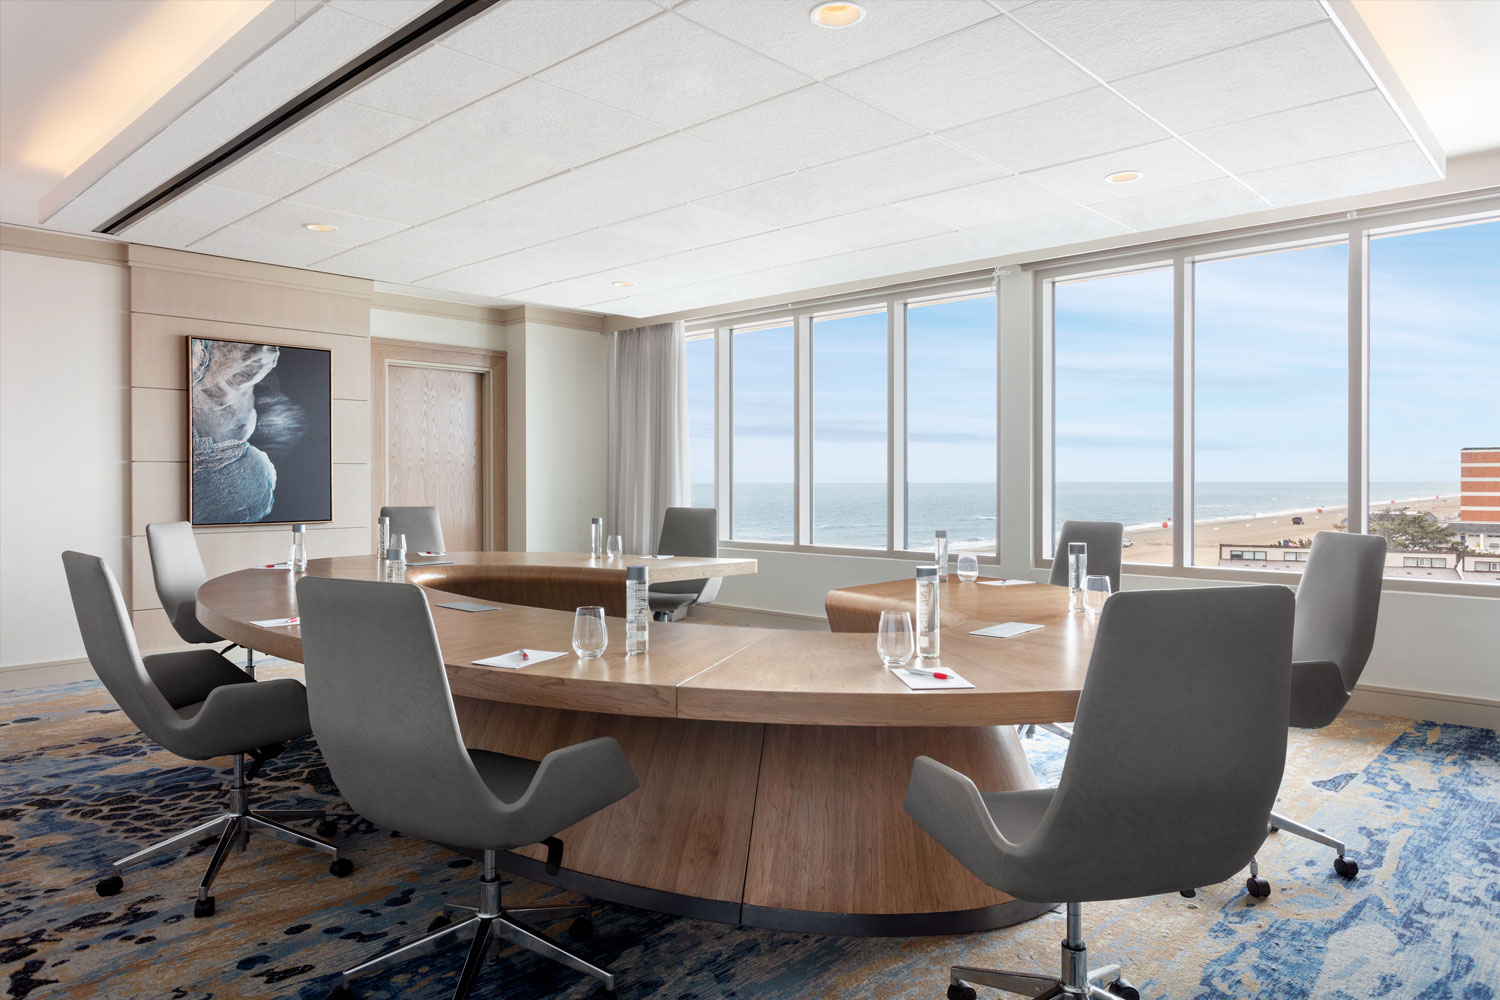 Example of a meeting at the Marriott Sinatra Boardroom